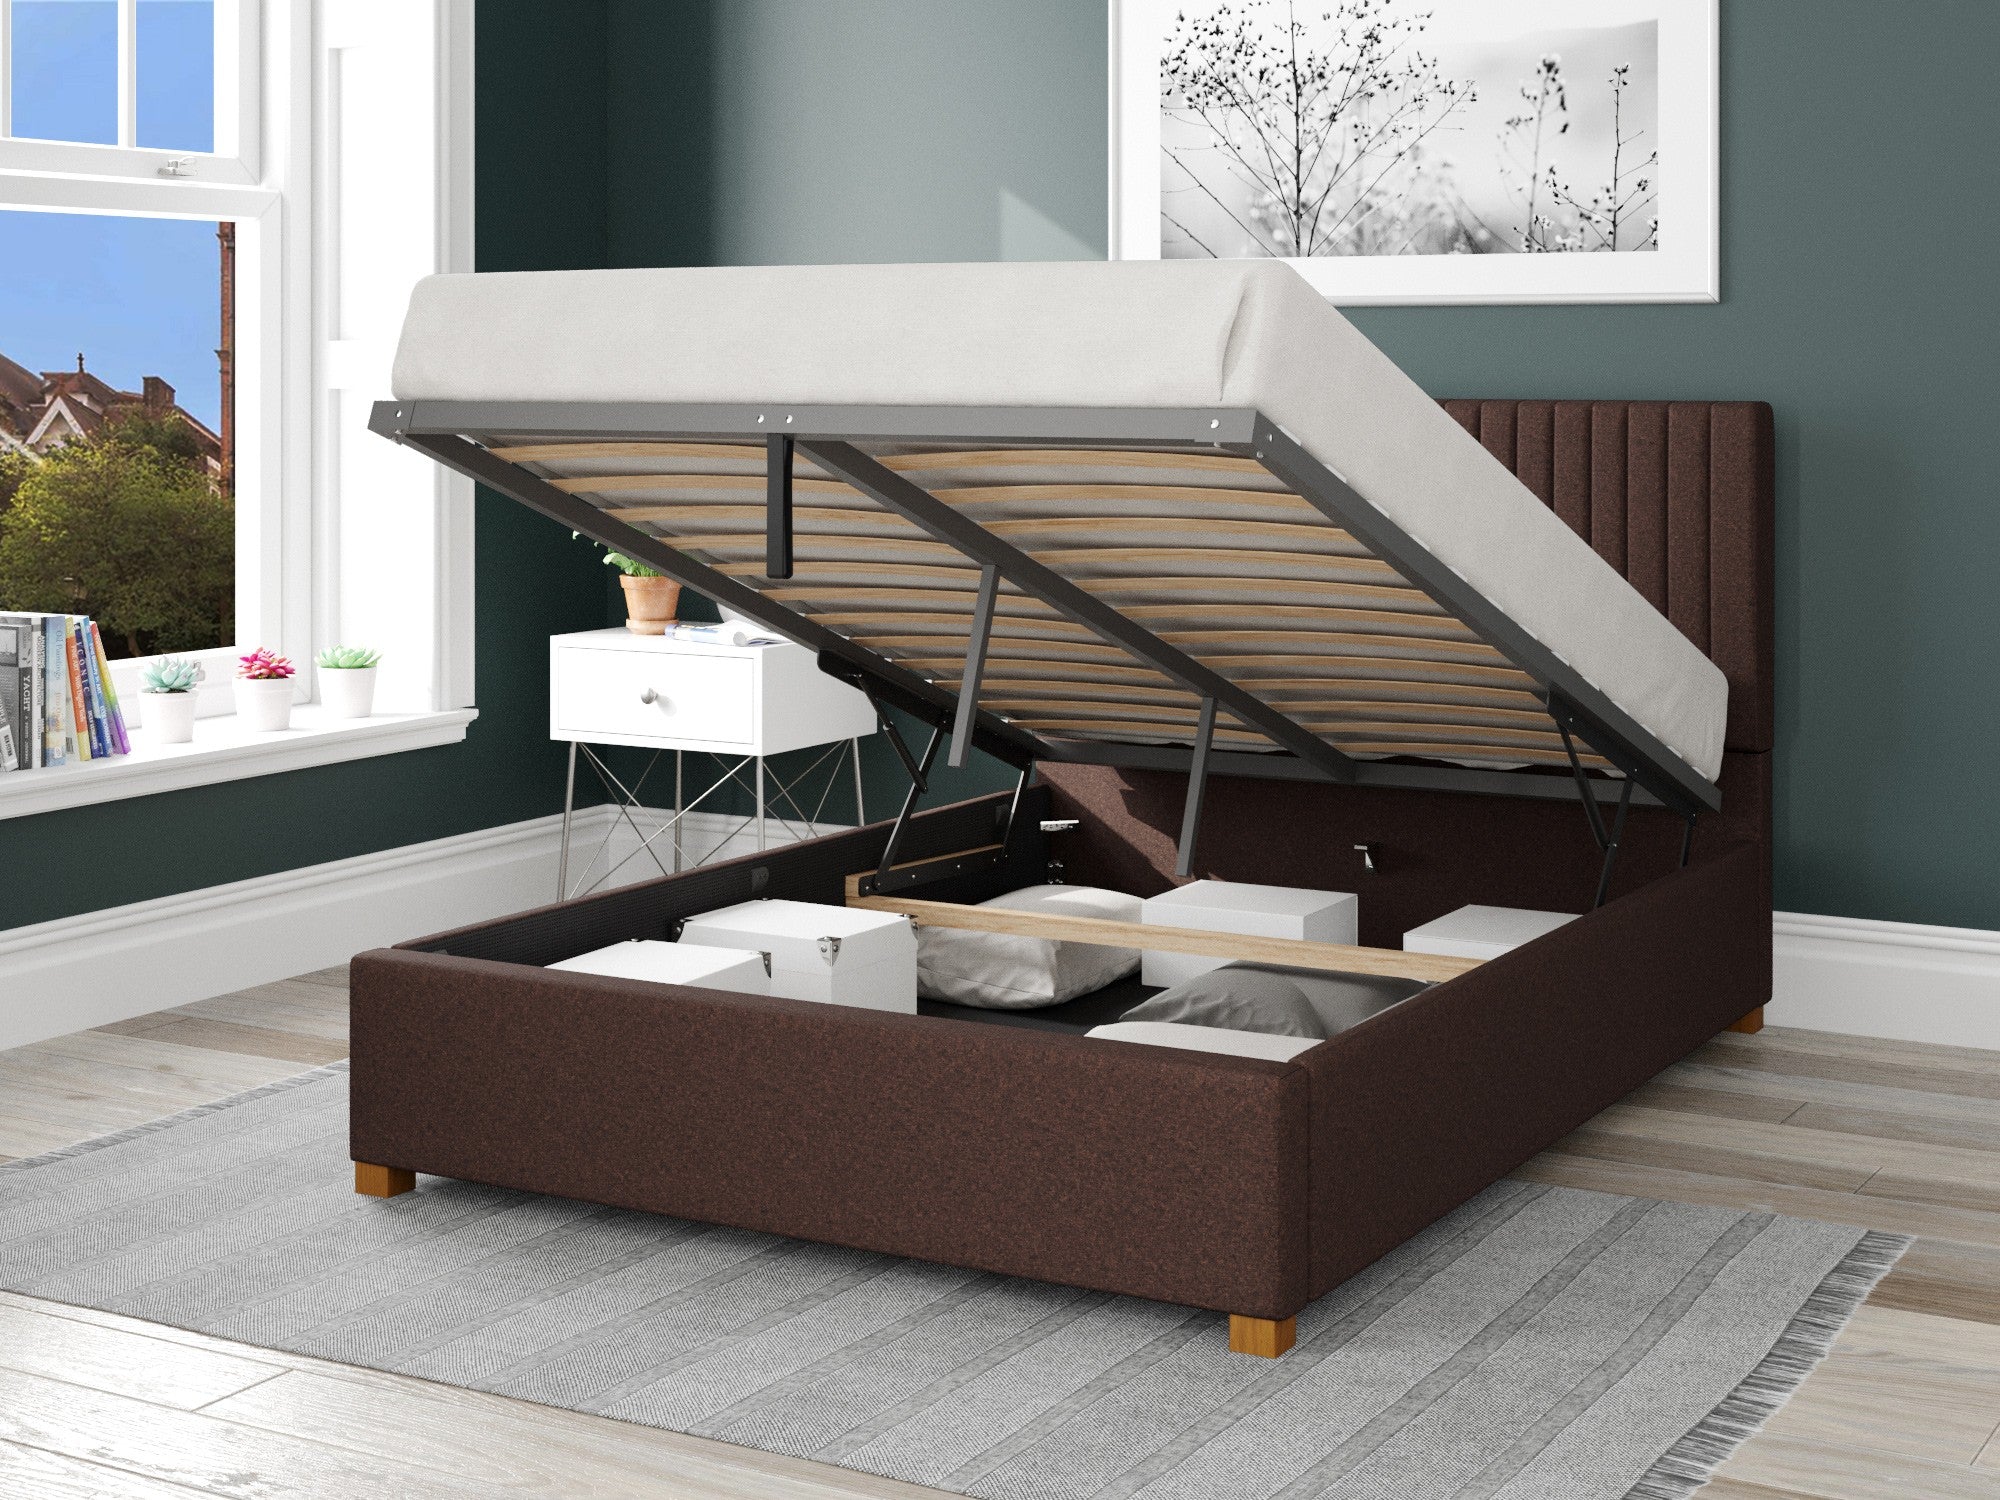 Grant Upholstered Ottoman Bed - Yorkshire Knit - Chocolate